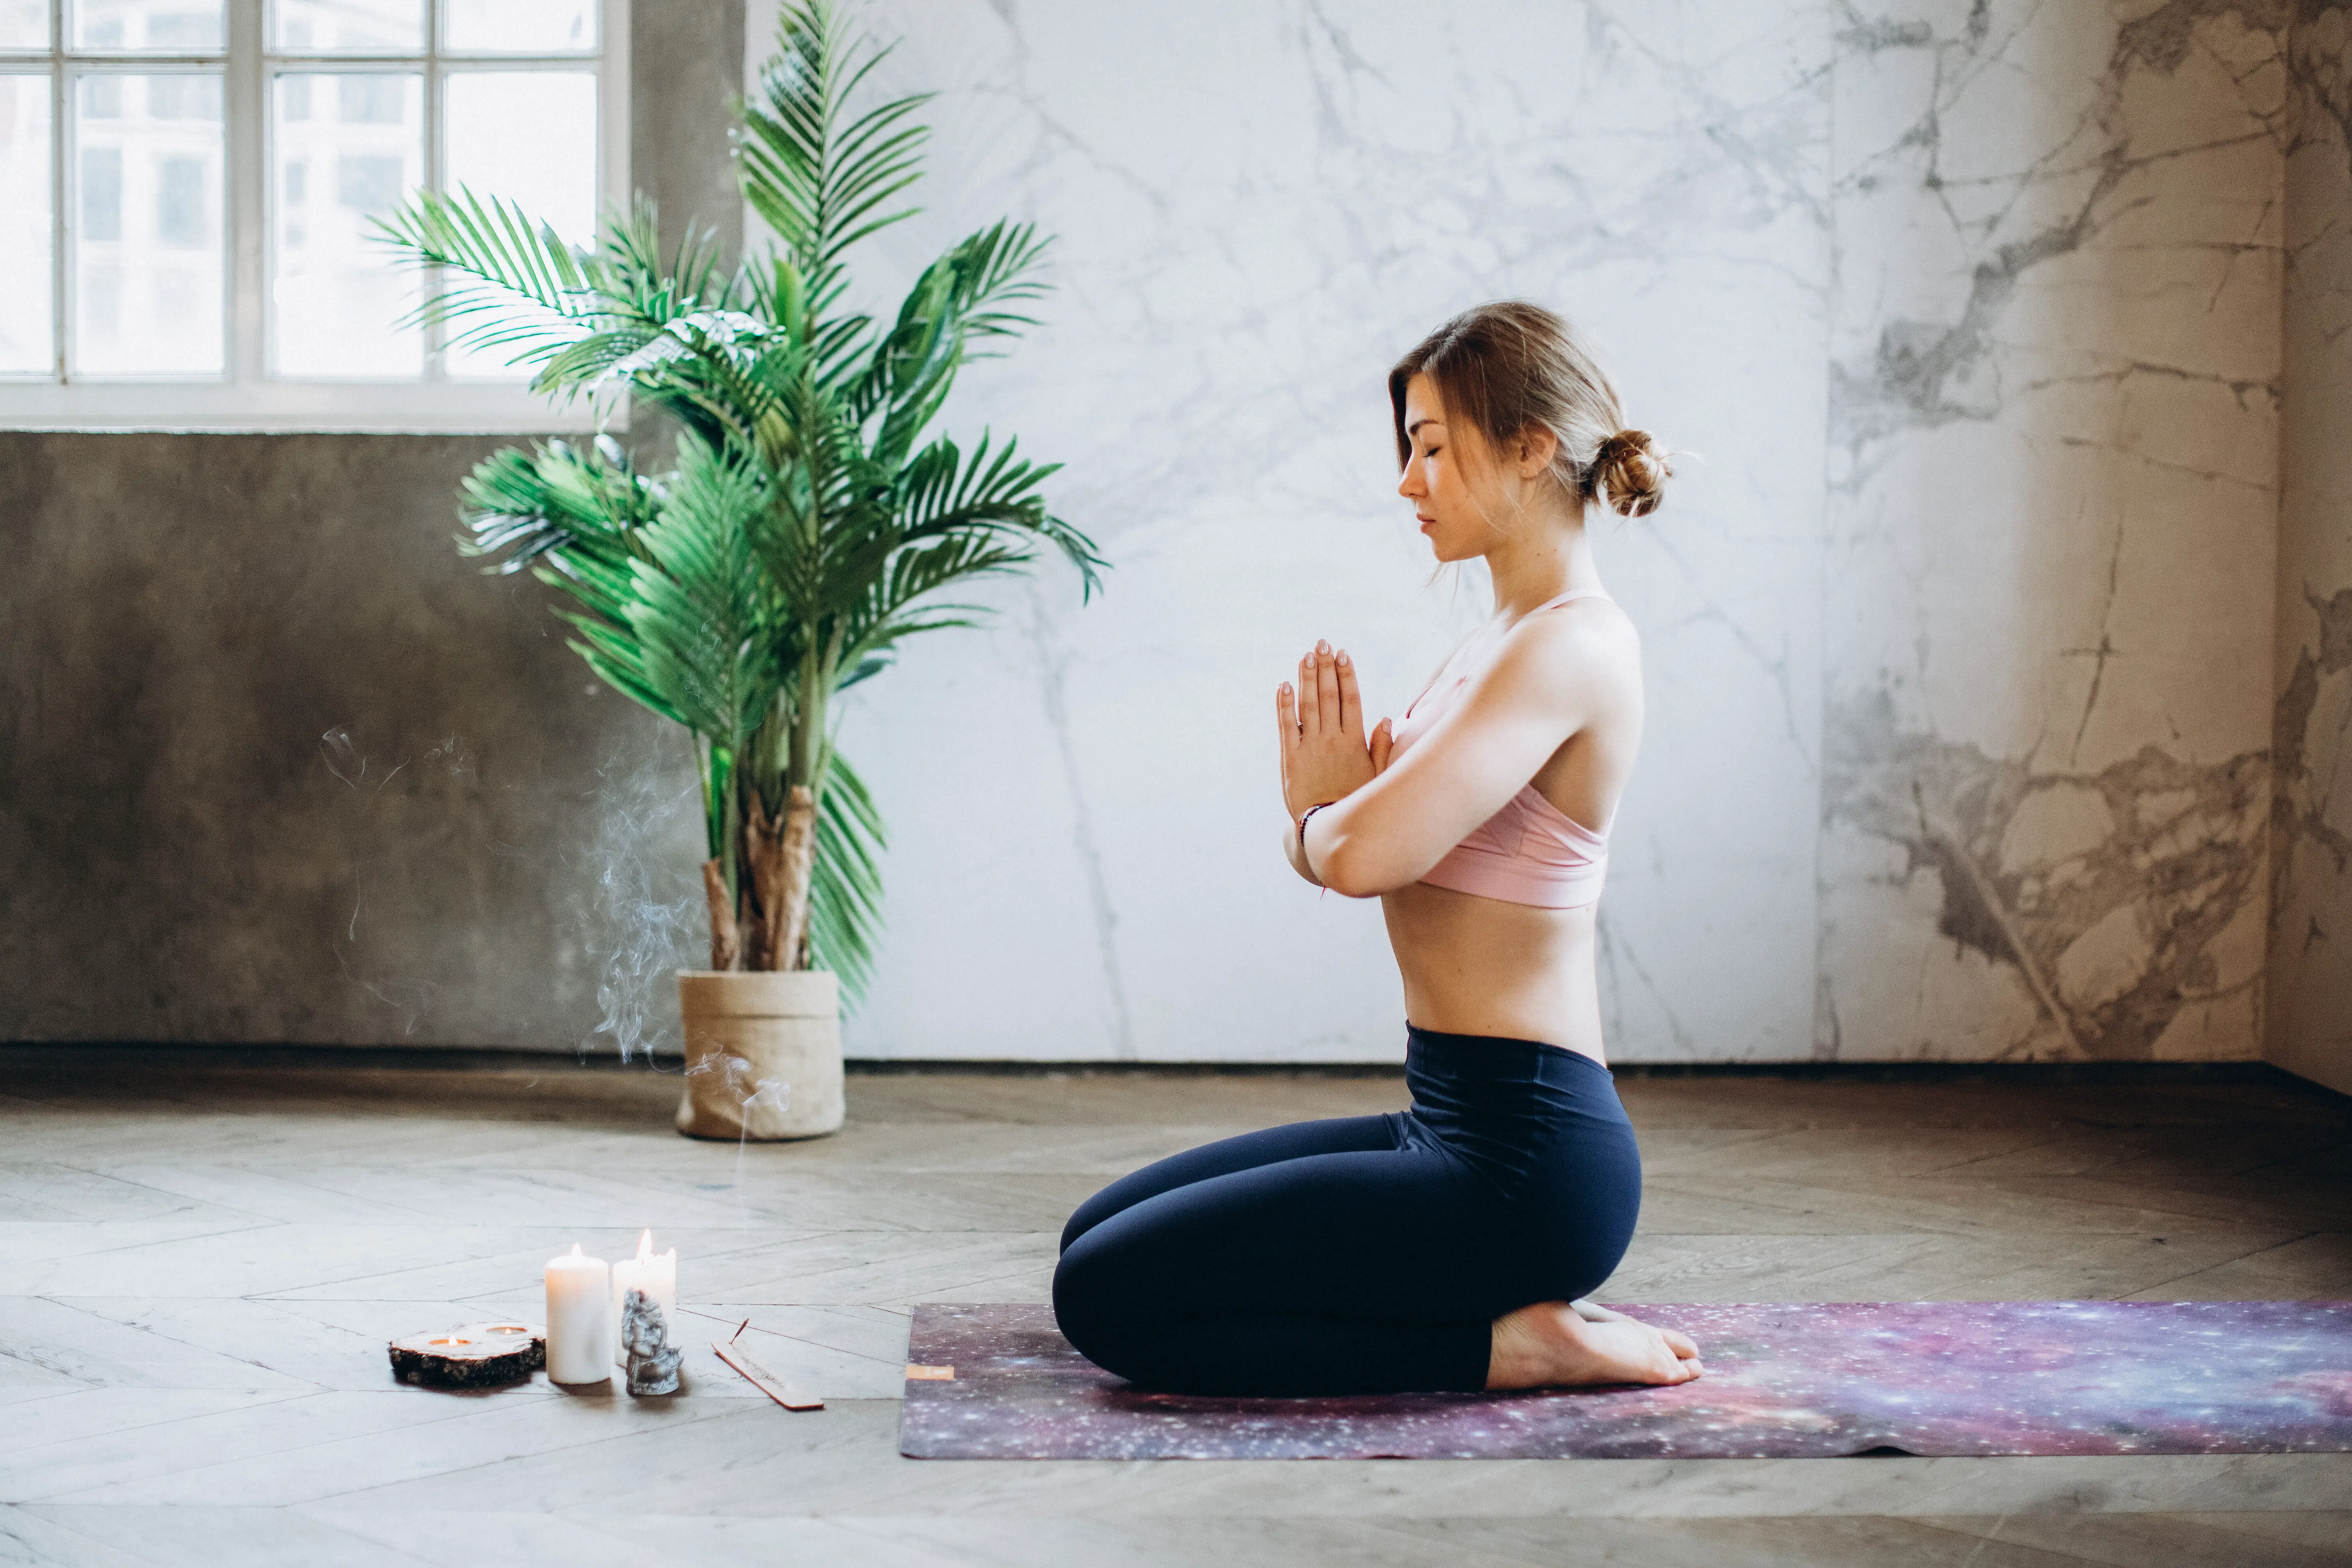 XR Wellness Startup Tripp Raises $11M in Extended Series A Funding